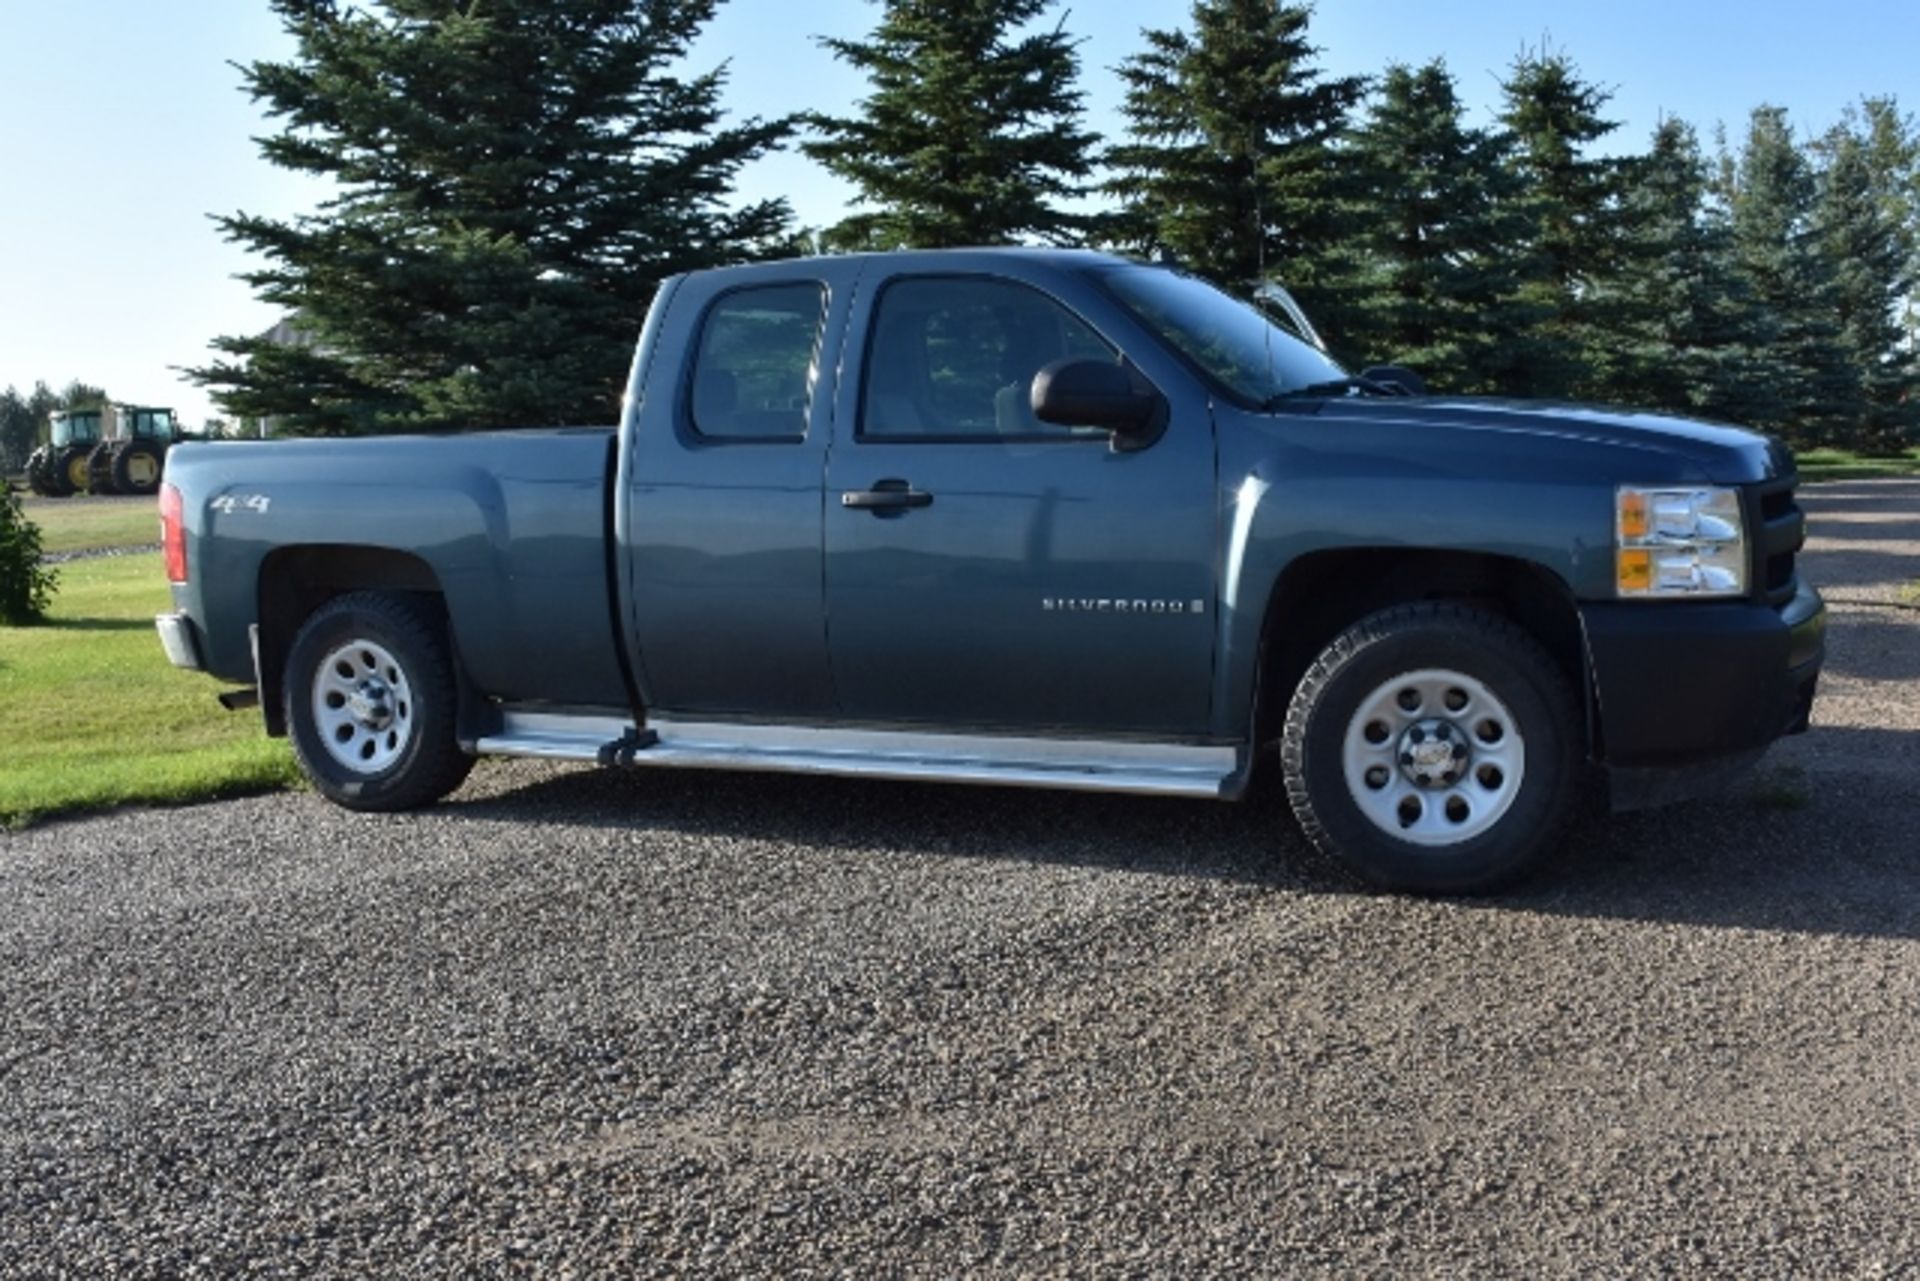 2008 Chevy Silverado 1500, 1/2 Ton, 4 x 4, 5.3L, Extended Cab, Approx. 60,000 kms